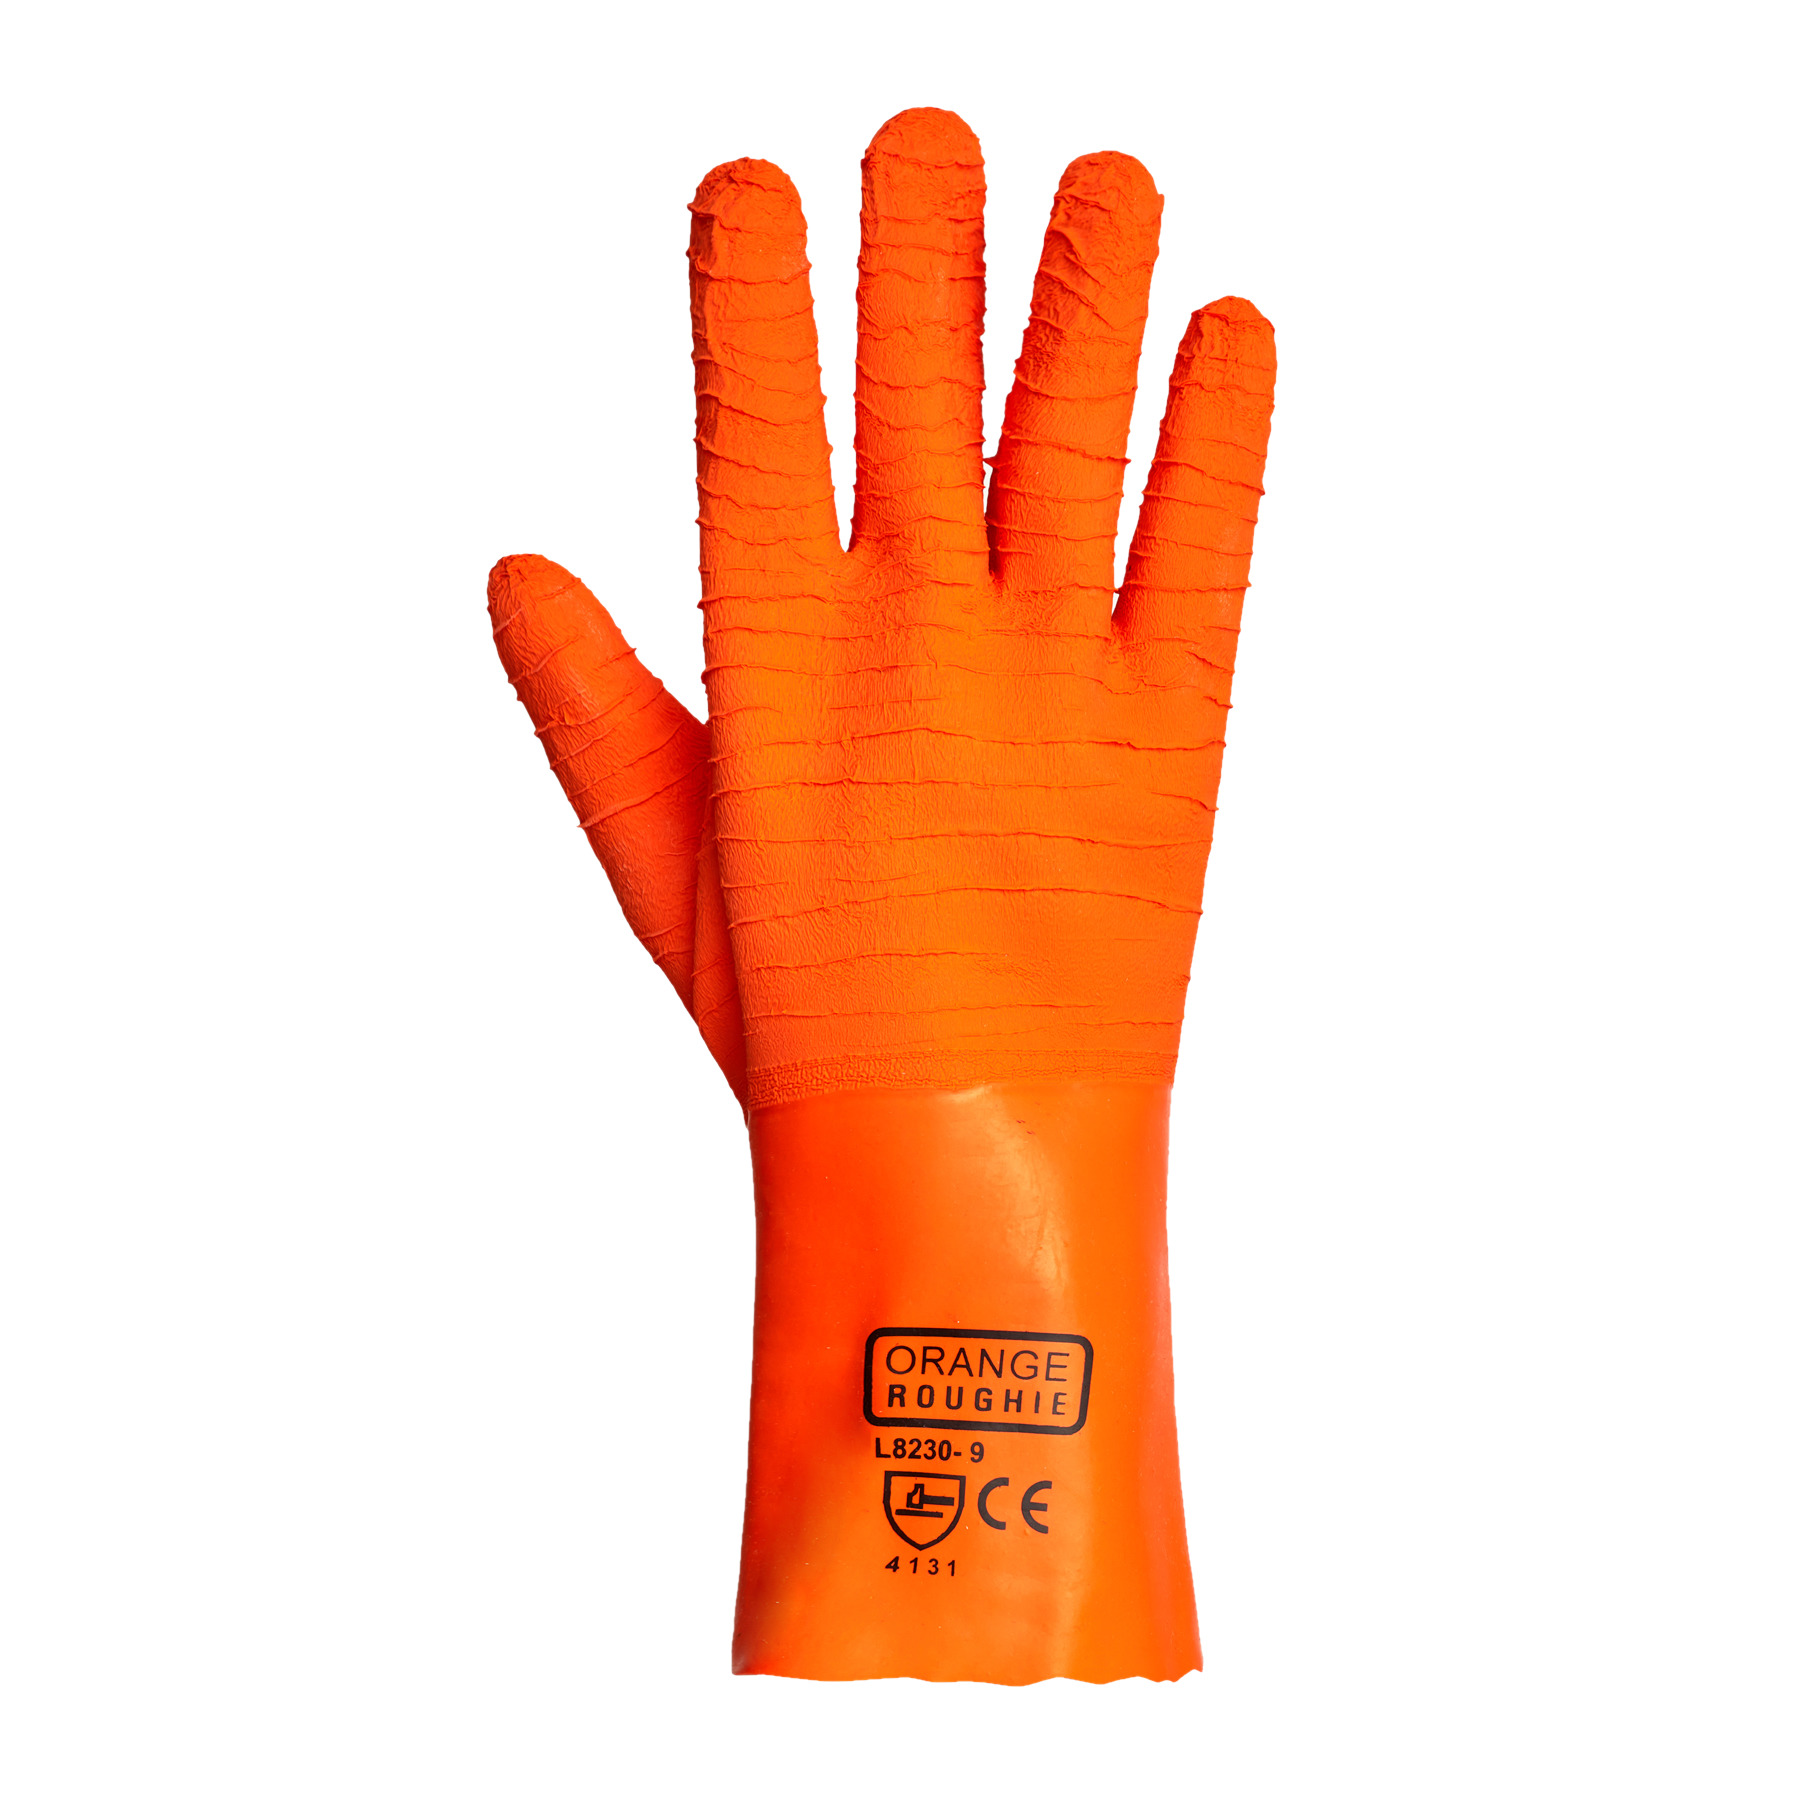 Aluminized Leather Gloves with Orange Chrome Leather and DuPont